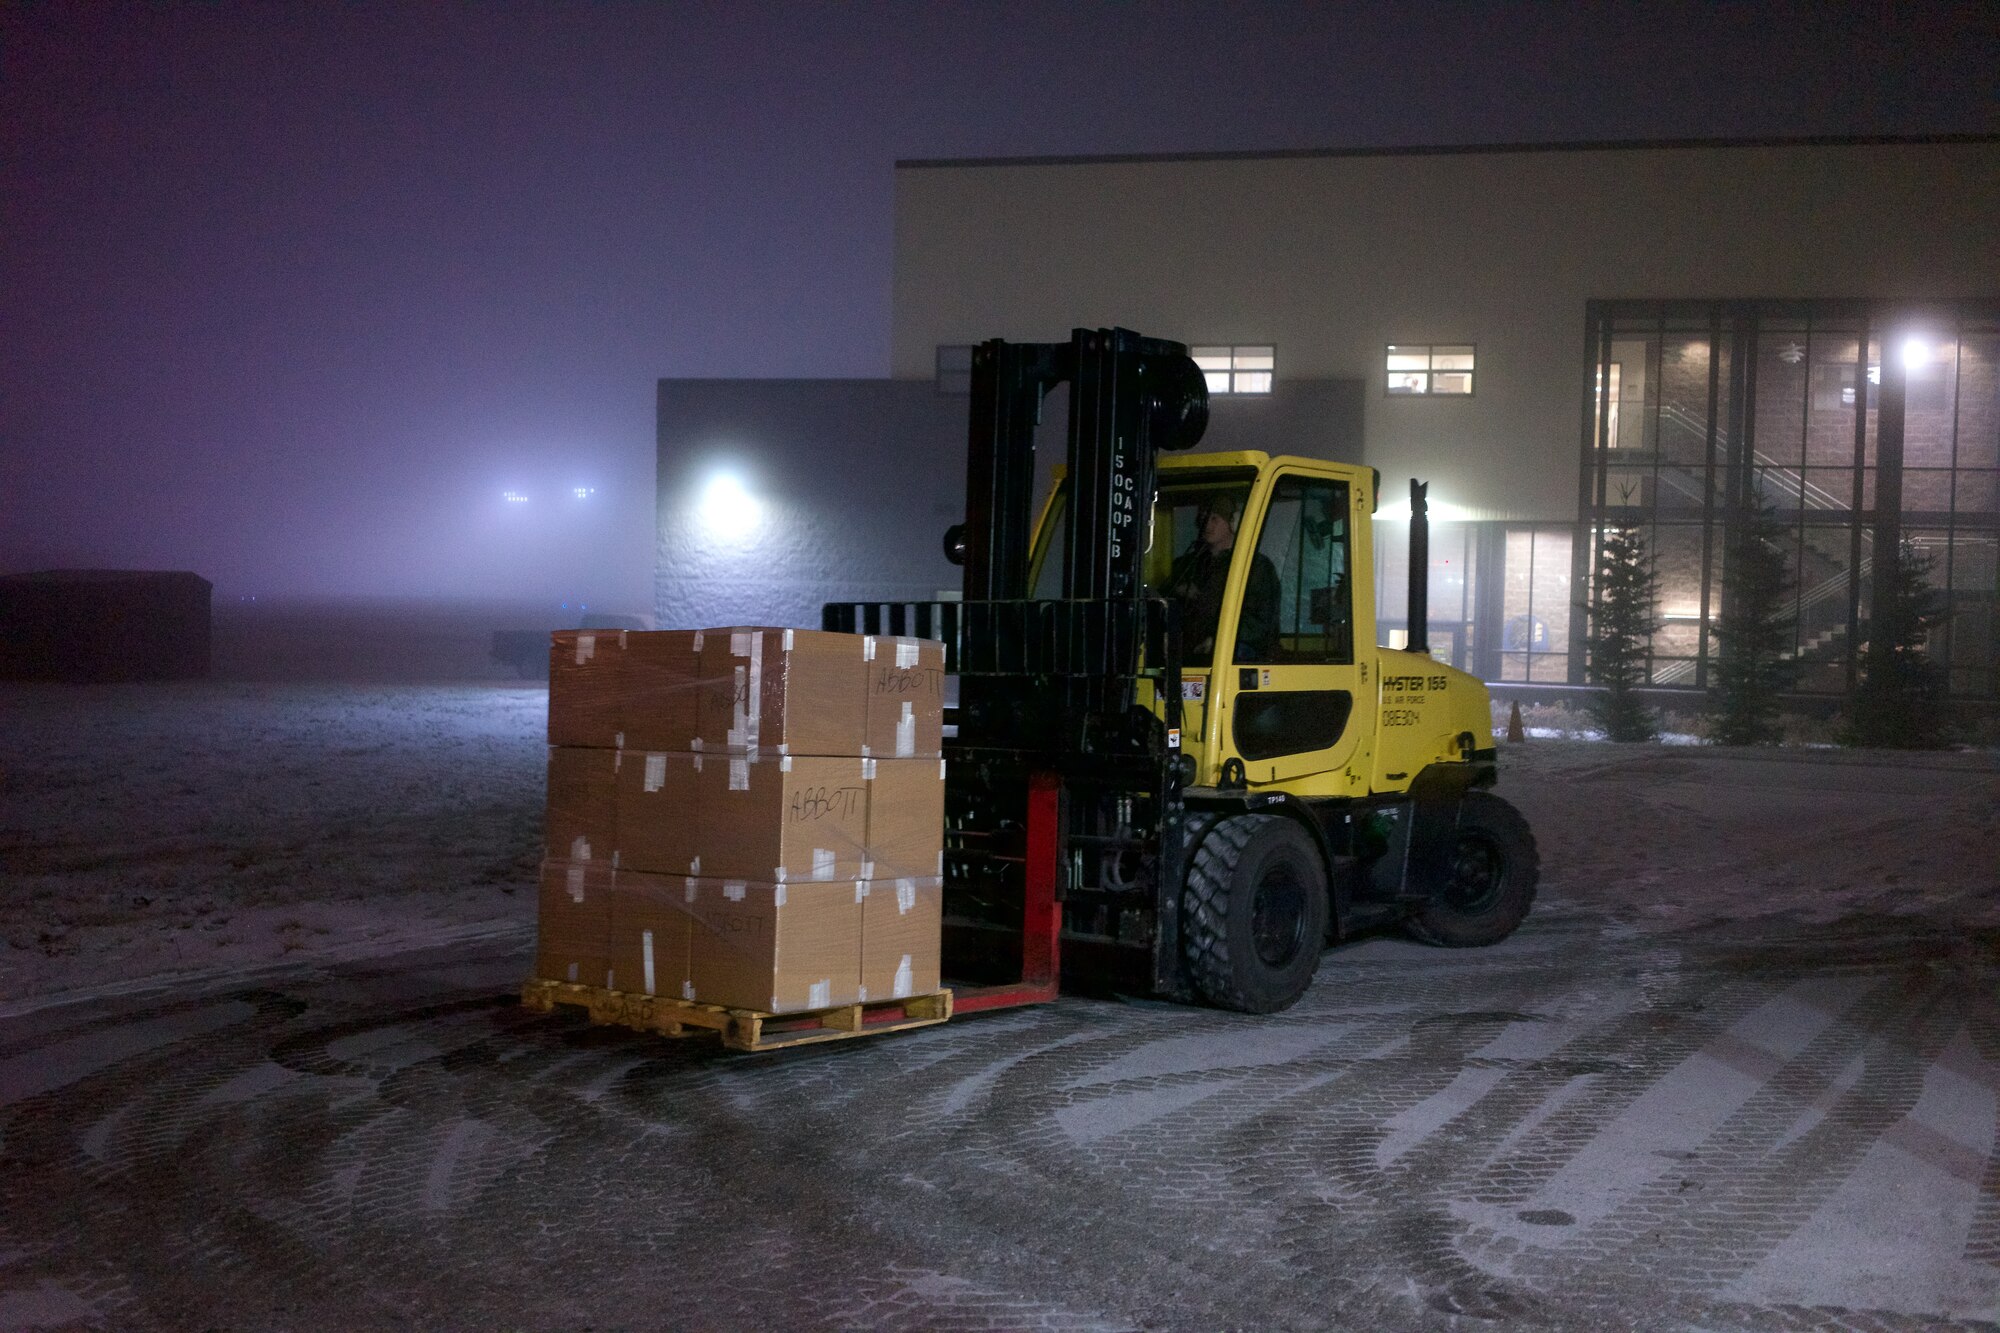 Airmen of 176th Wing load boxes containing prescription drugs Nov. 6, 2018, at Joint Base Elmendorf-Richardson, Alaska, for transport by HC-130J Combat King II to Spokane, Washington, for incineration. Airmen of 176th Wing, members of the Alaska National Guard Counterdrug Support Program, and special agents of the Drug Enforcement Administration joined forces in the effort of transporting more than 4,000 pounds of prescription drugs turned in during Alaska’s biannual prescription drug take back. (U.S. Air National Guard photo by David Bedard/Released)